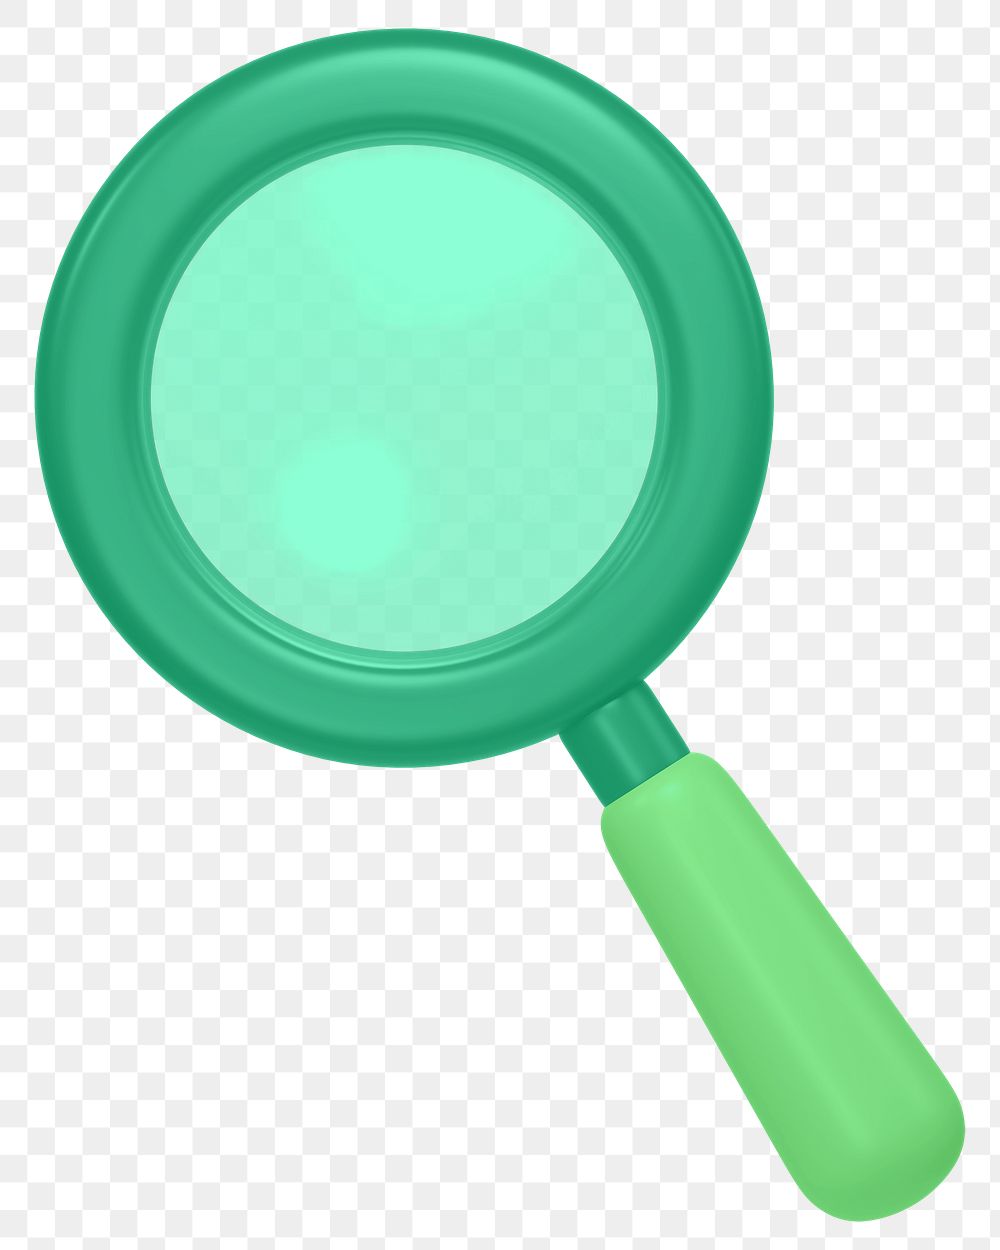 Magnifying glass png 3D sticker, transparent background